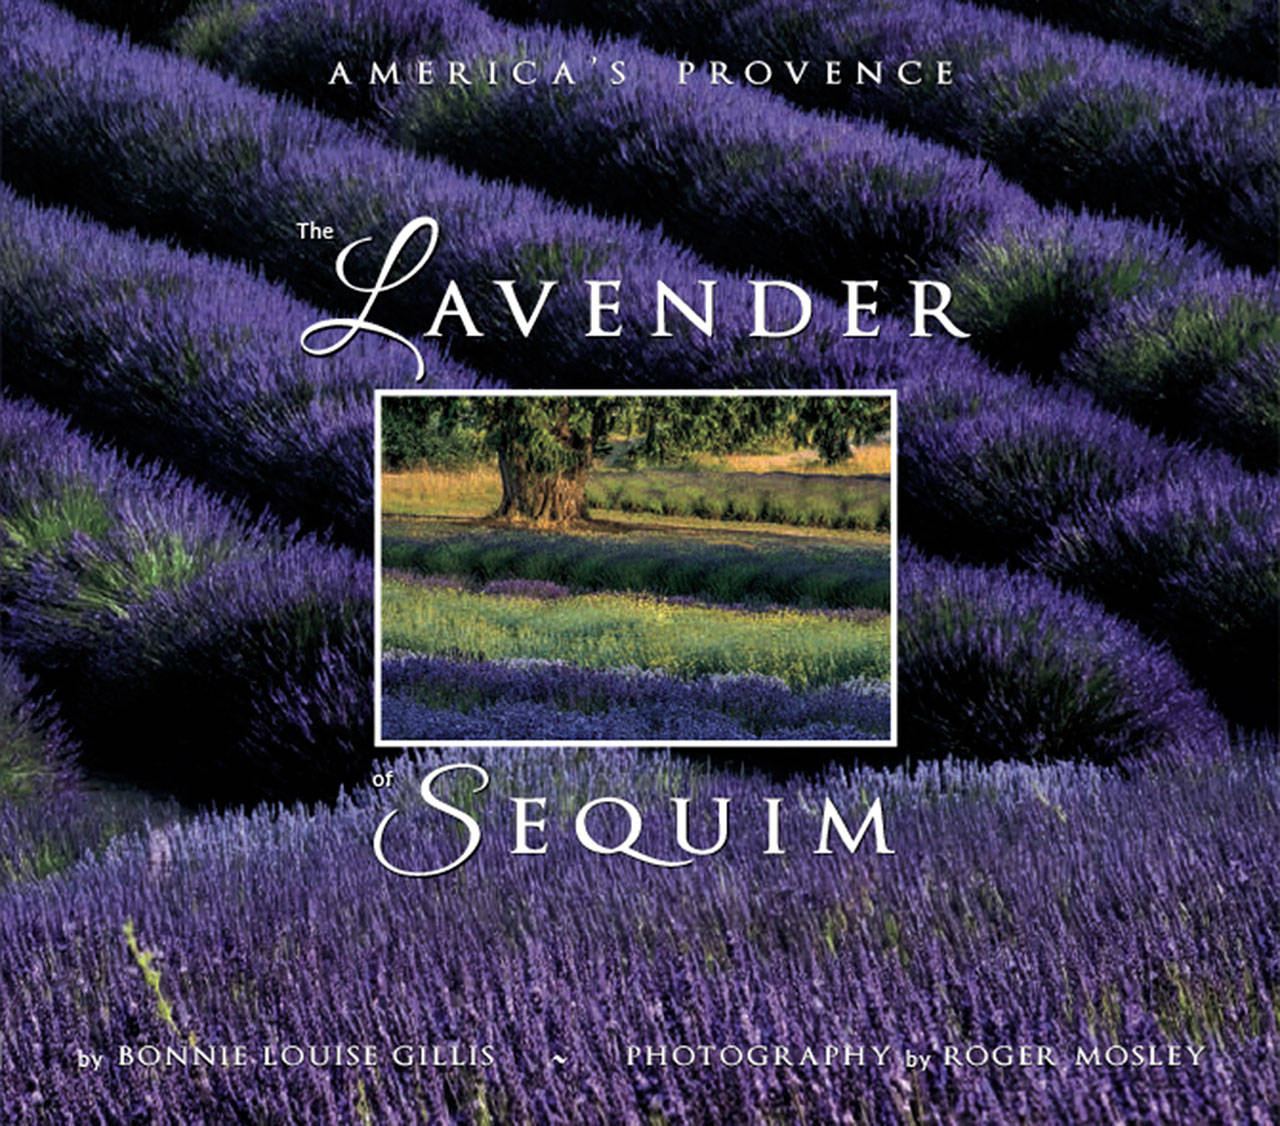 The Lavender of Sequim: America's Provence